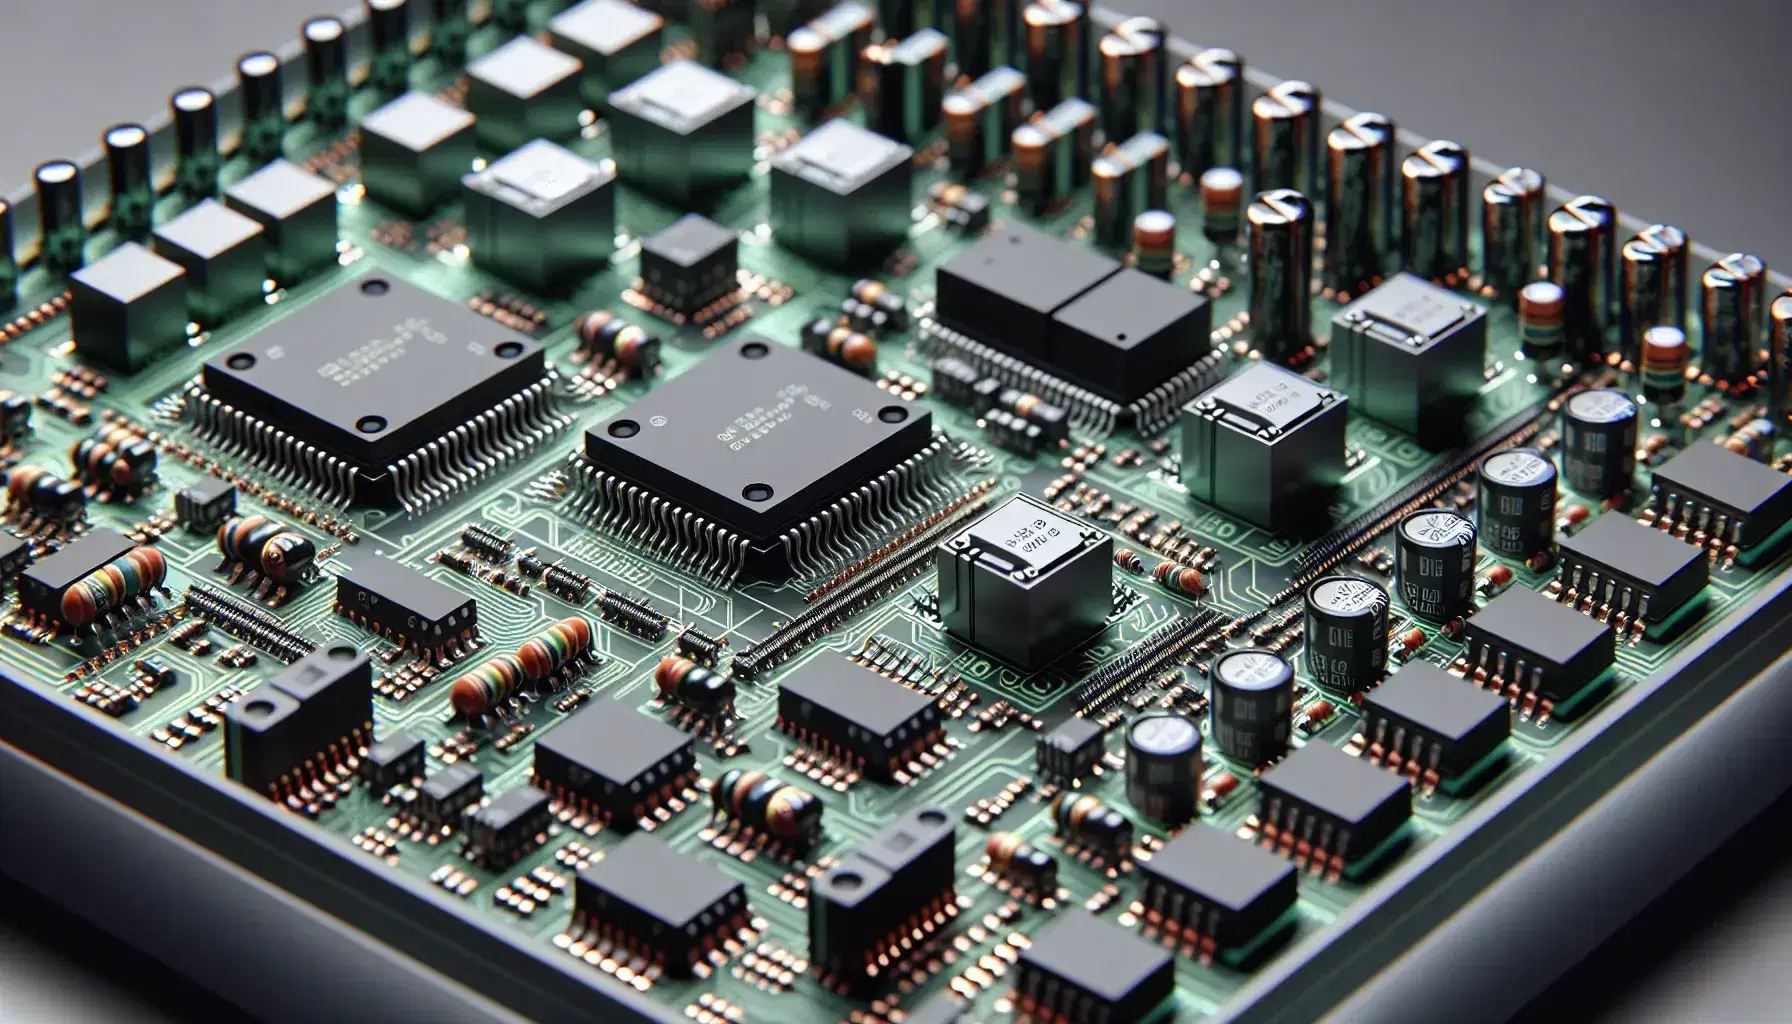 Close-up of a modern digital electronic board with components such as integrated circuits, resistors, capacitors and diodes on a green background.